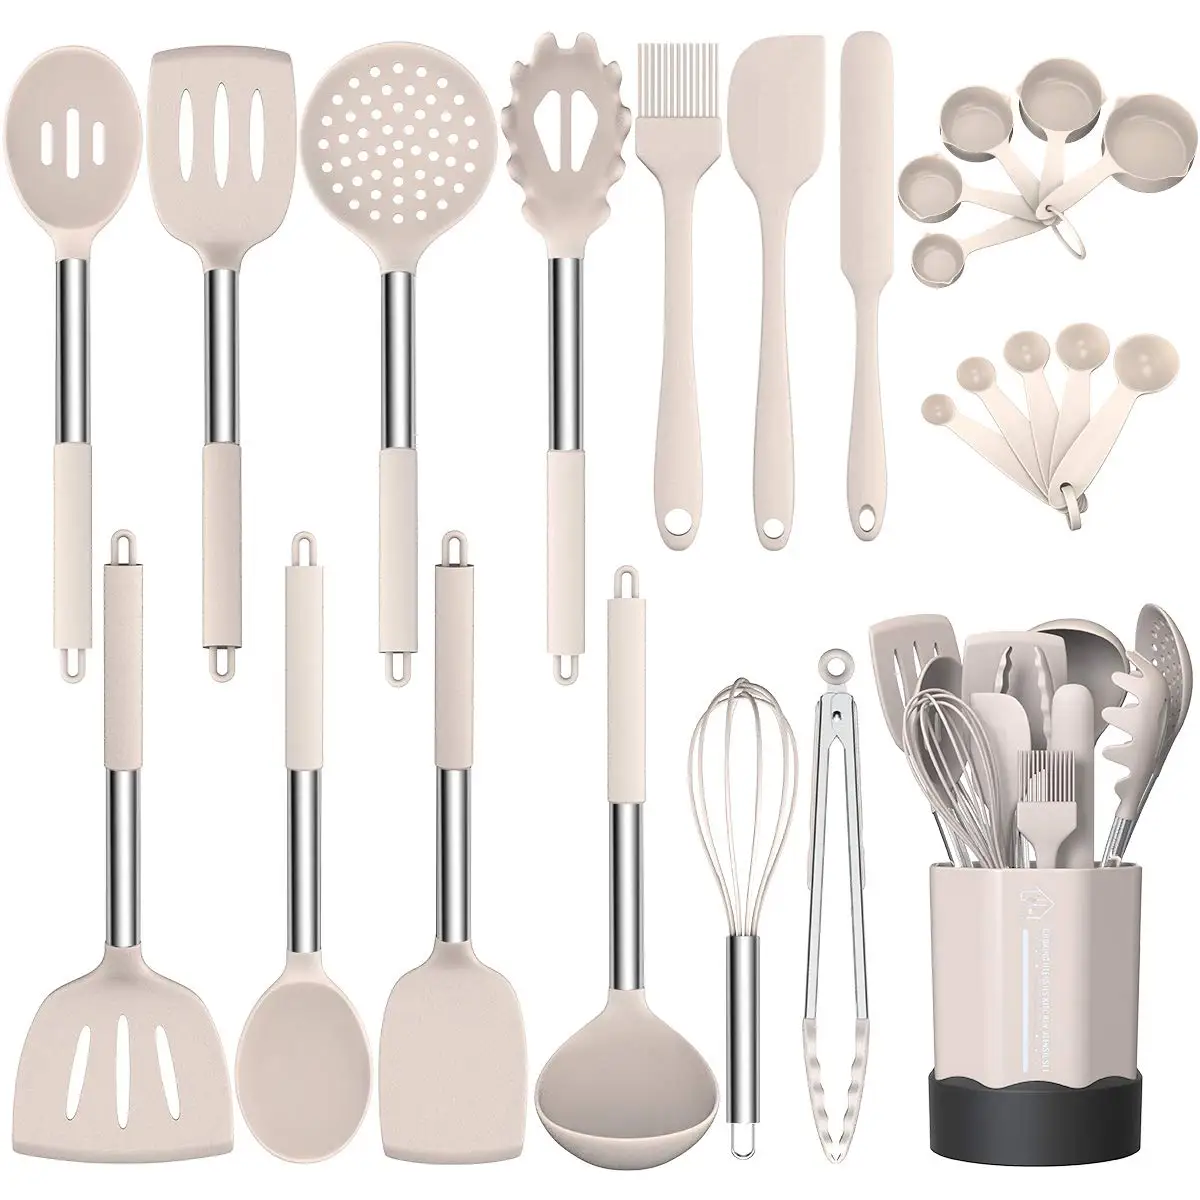 24pcs Silicone Non-stick Heat Resistant Best Cooking Utensil Spatulas Set with Copper Stainless Steel Handle